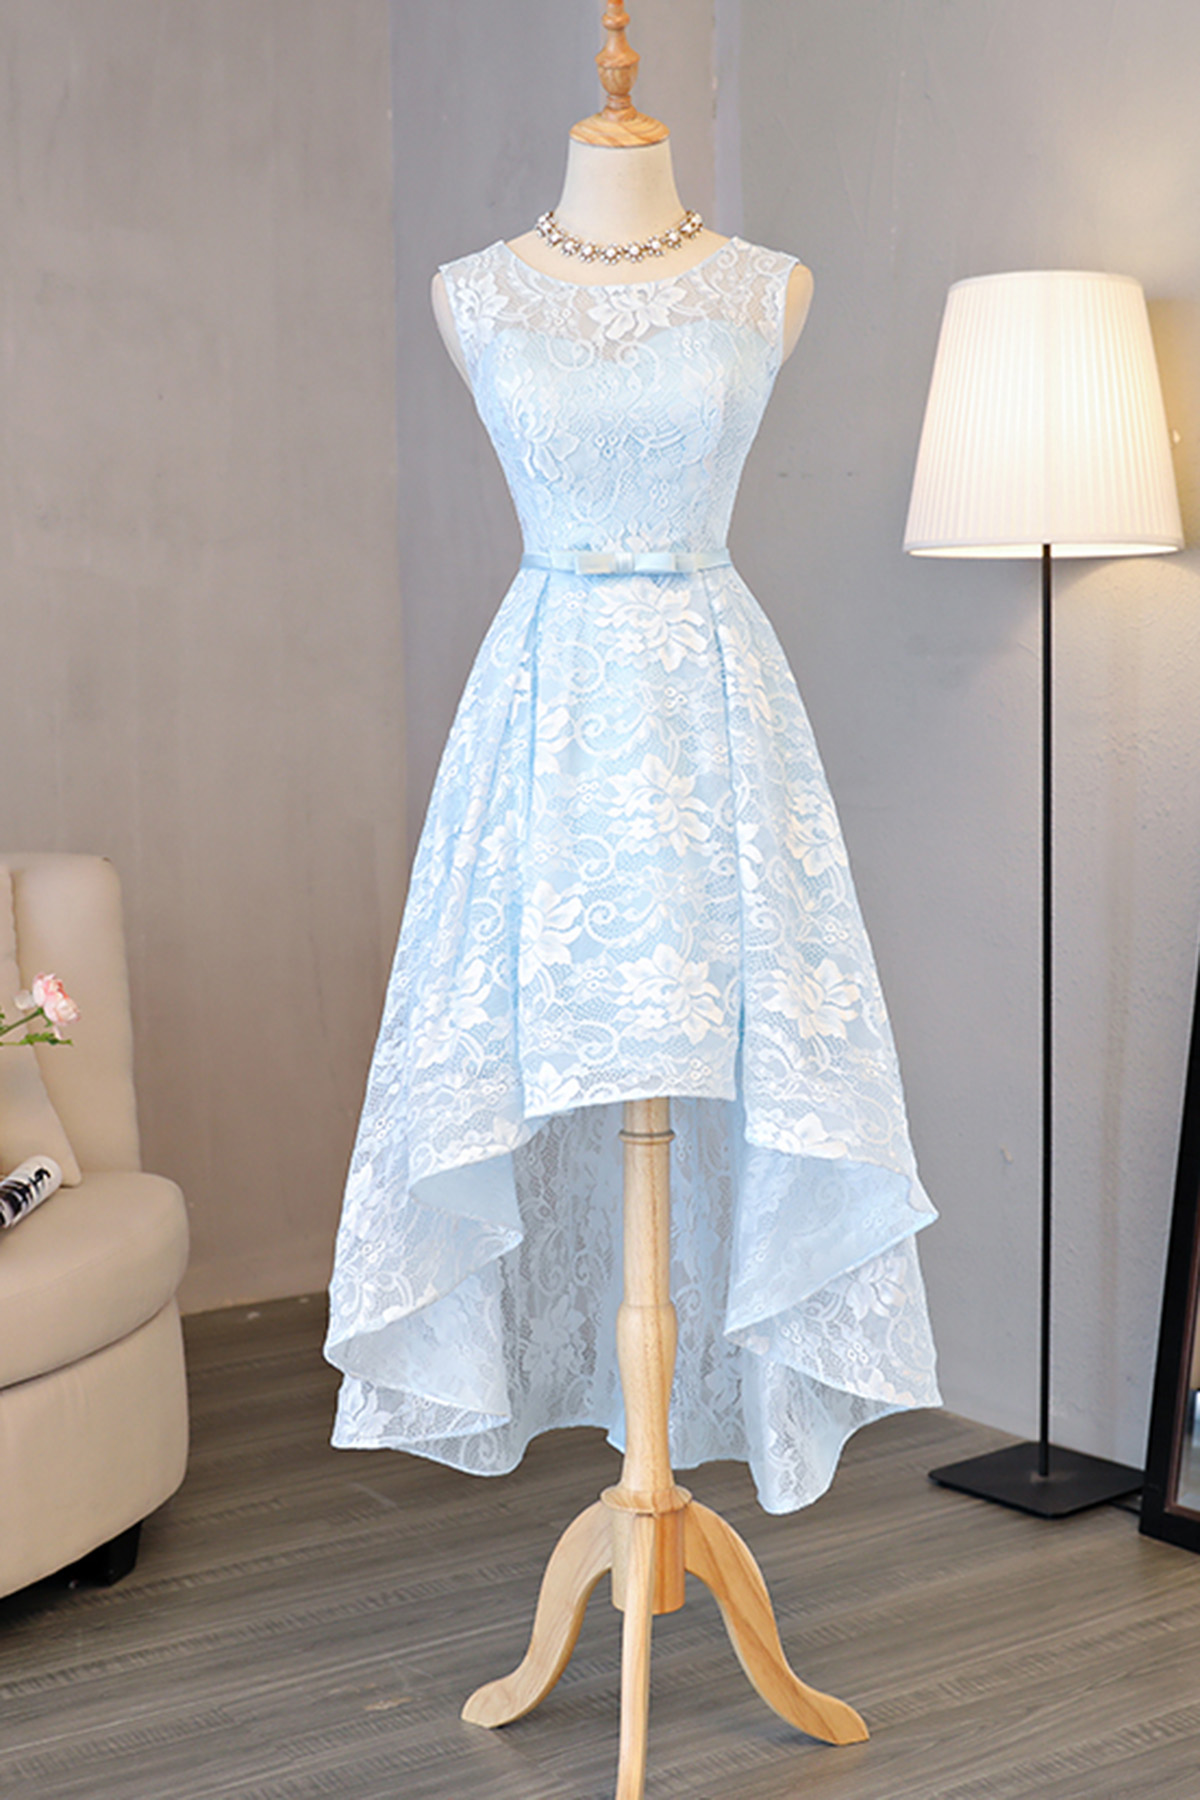 Light Blue Homecoming Gown,lace Round Neck Homecoming Dresses,high-low Prom Dress,homecoming Dress With Bow,h052